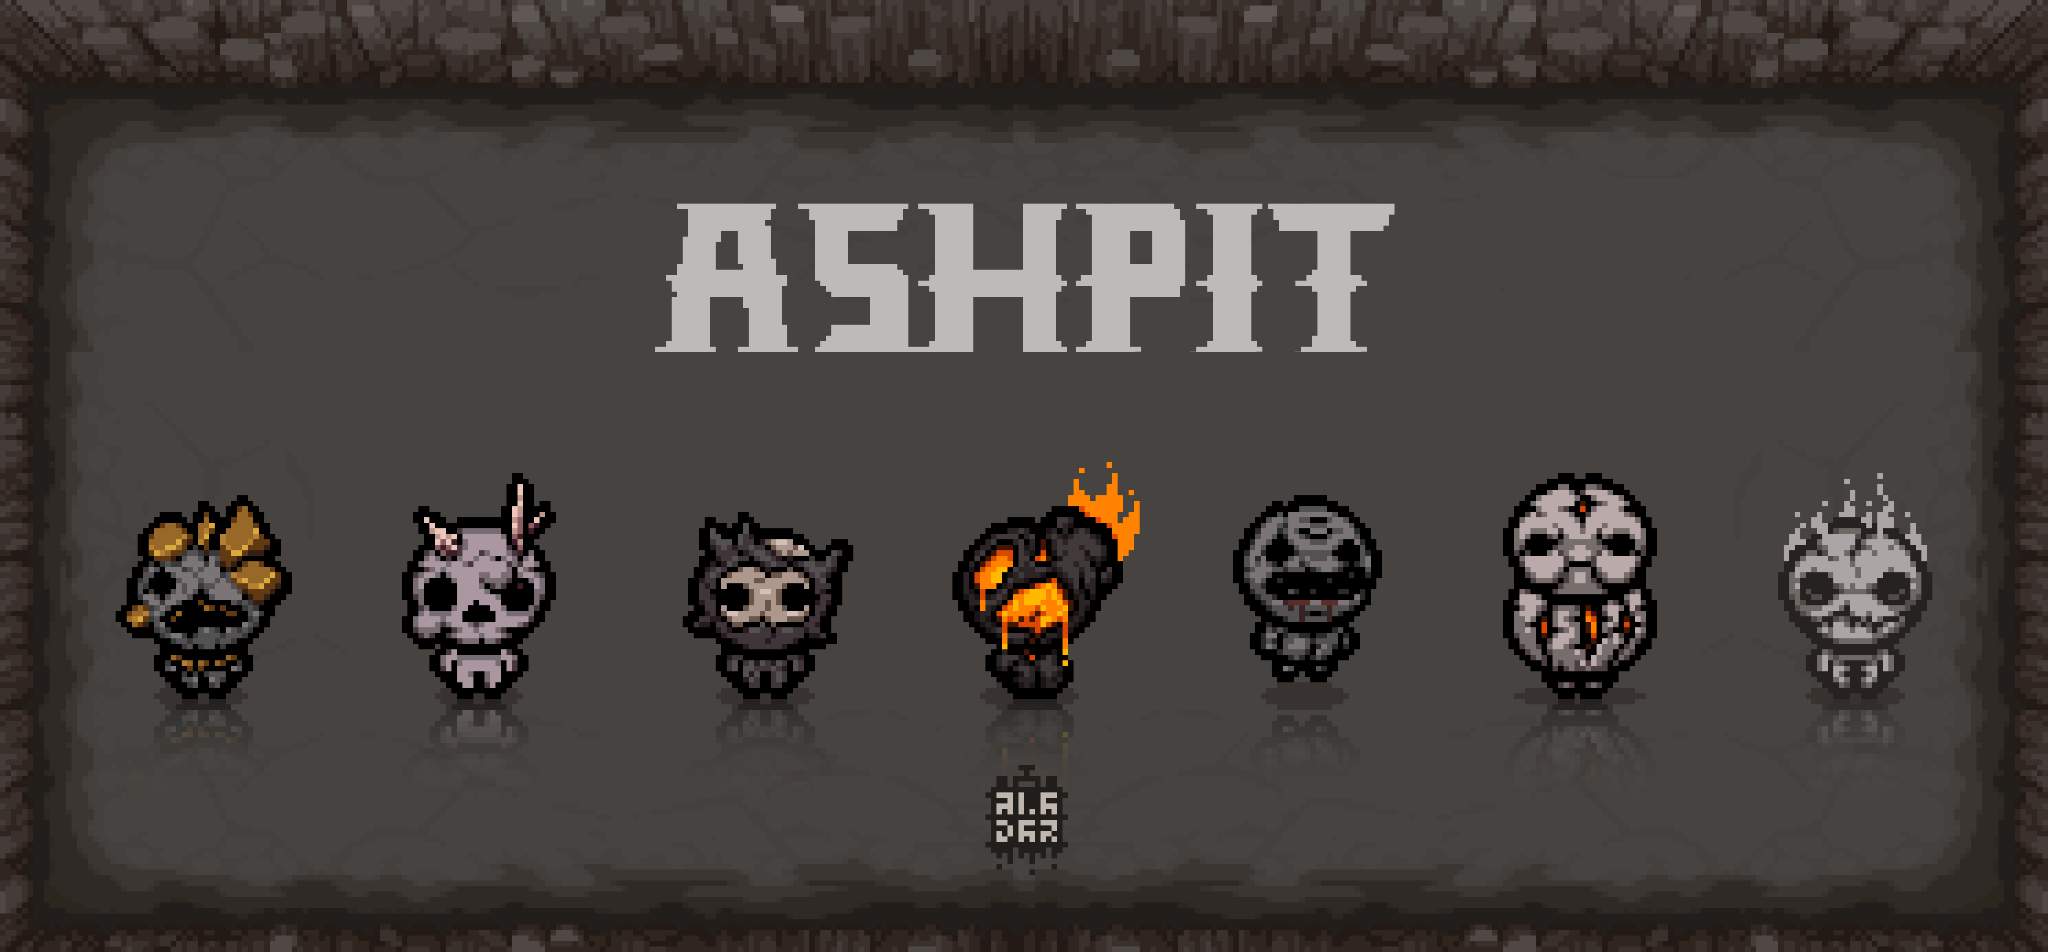 7 Deadly Sins For Ashpit The Binding Of Isaac Official Amino 2861